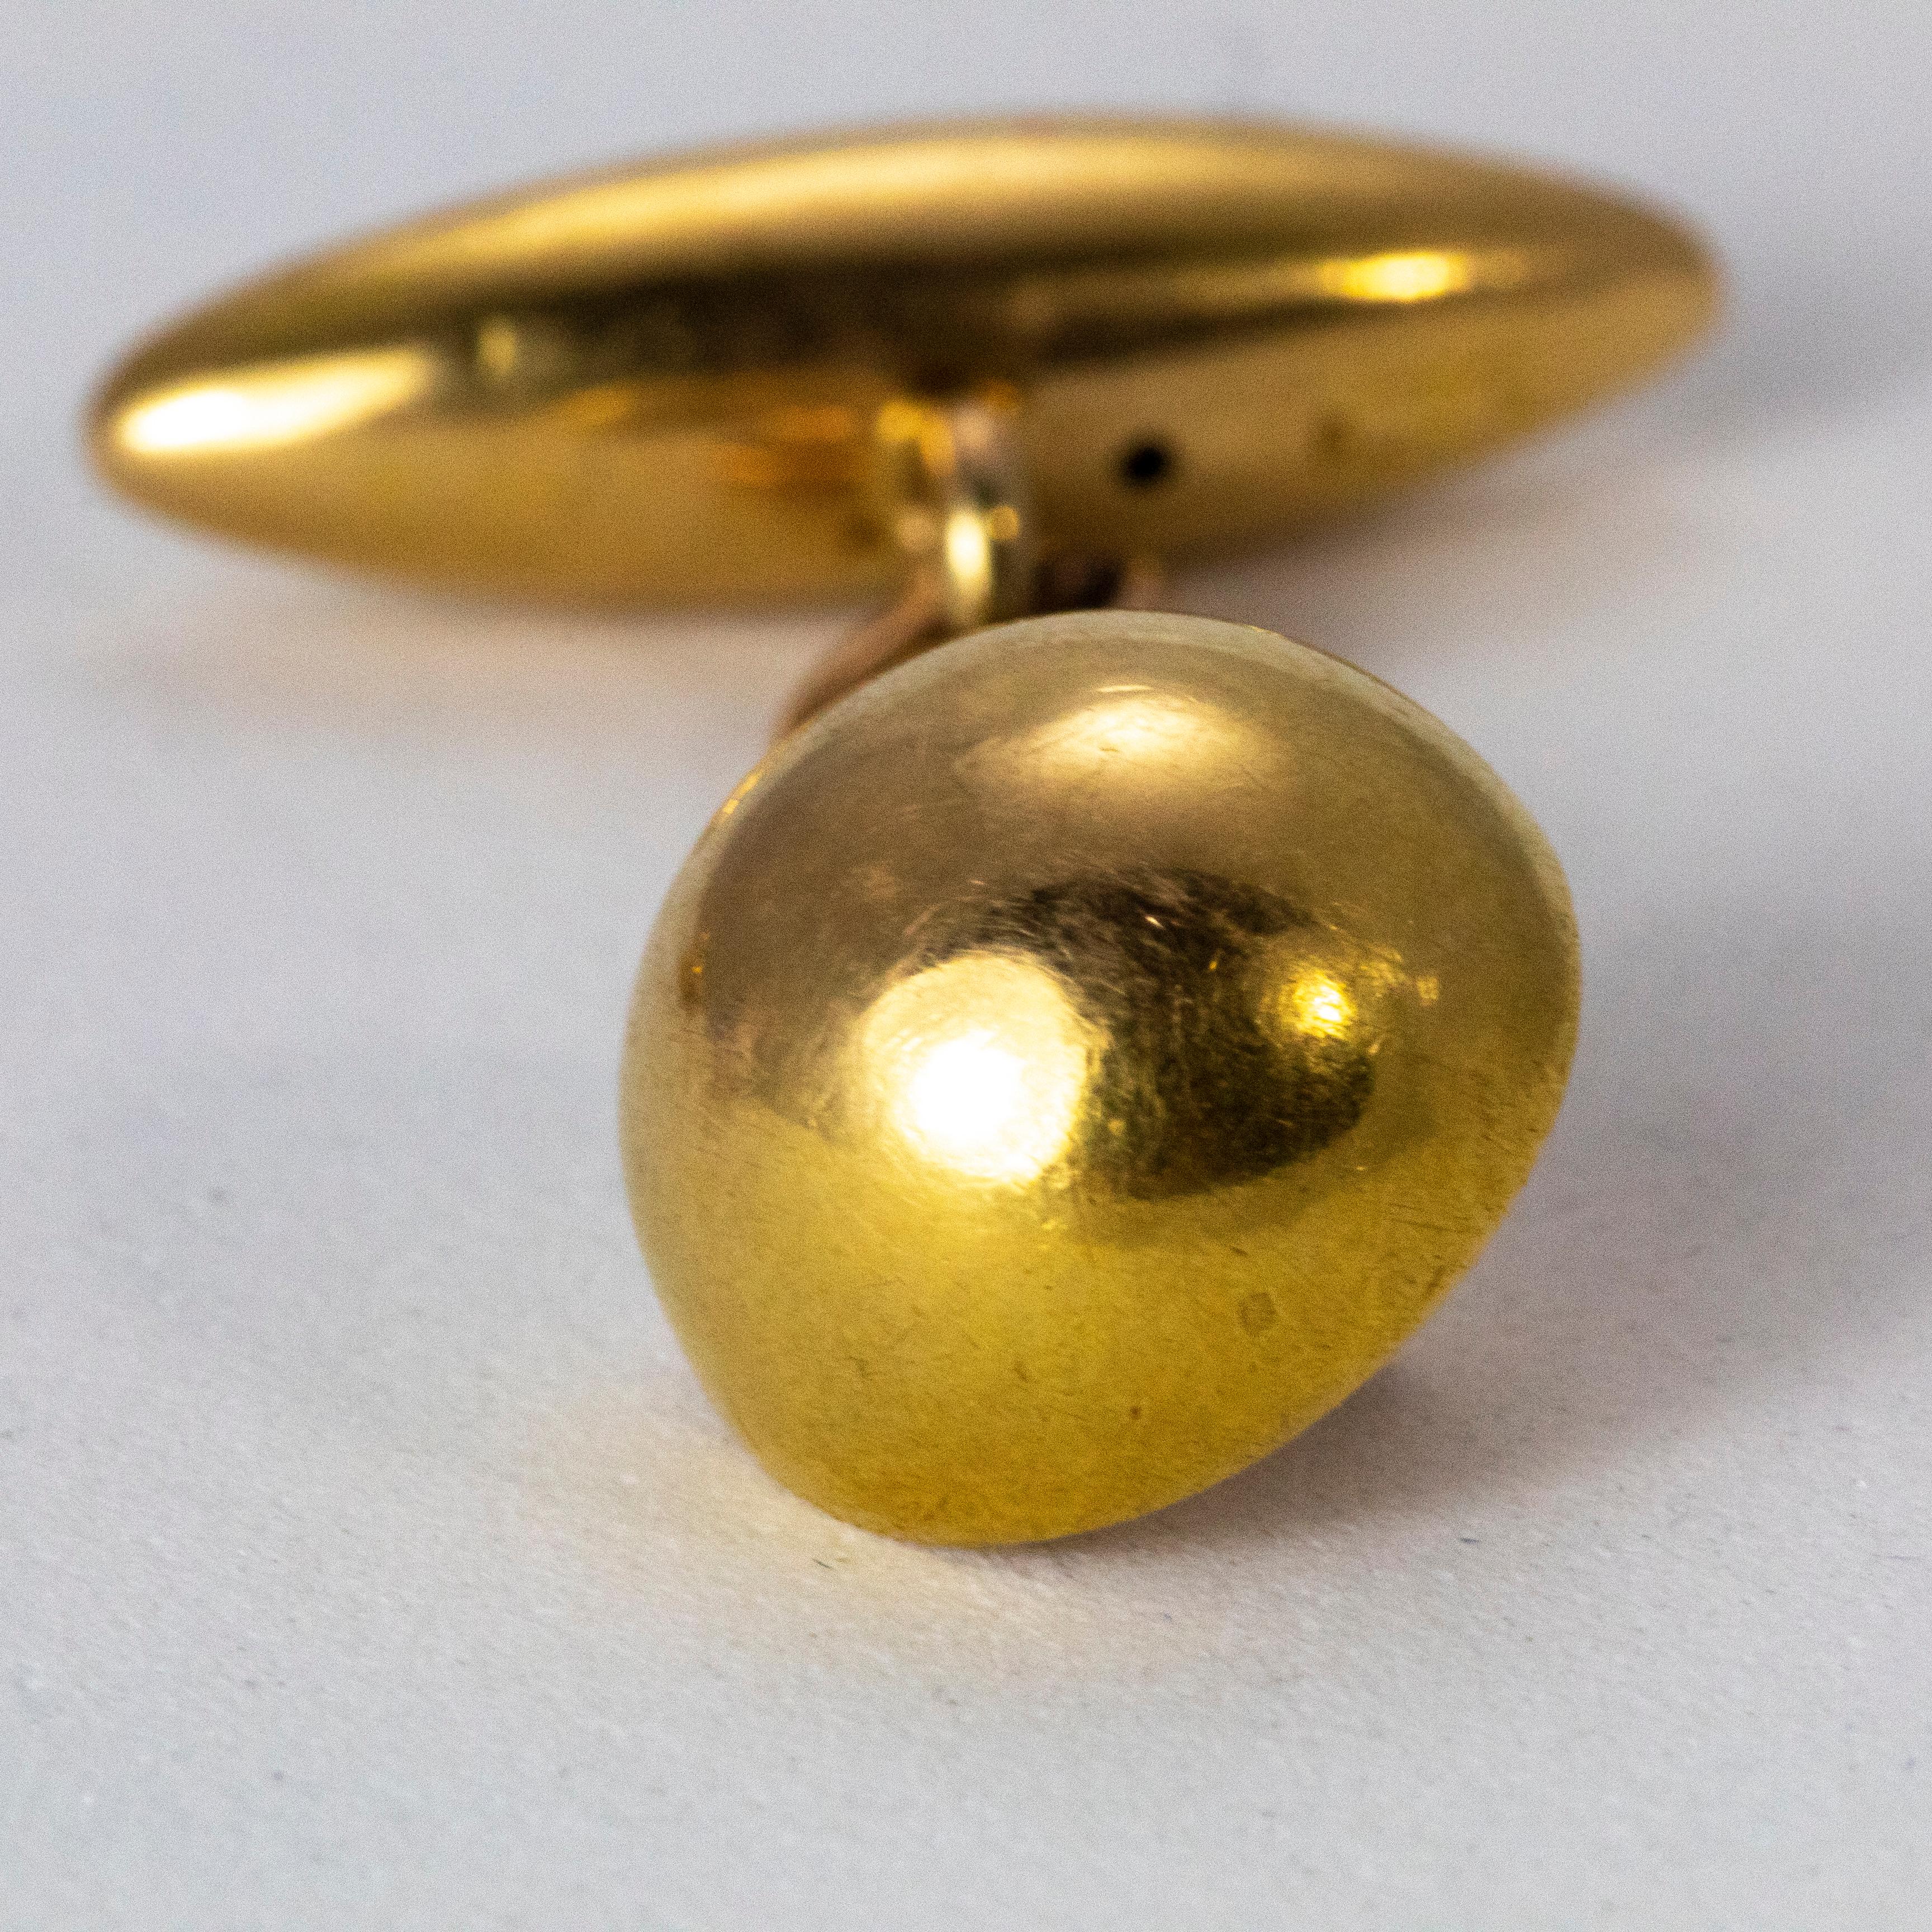 Edwardian 15 Karat Yellow Gold Cufflinks In Good Condition For Sale In Chipping Campden, GB